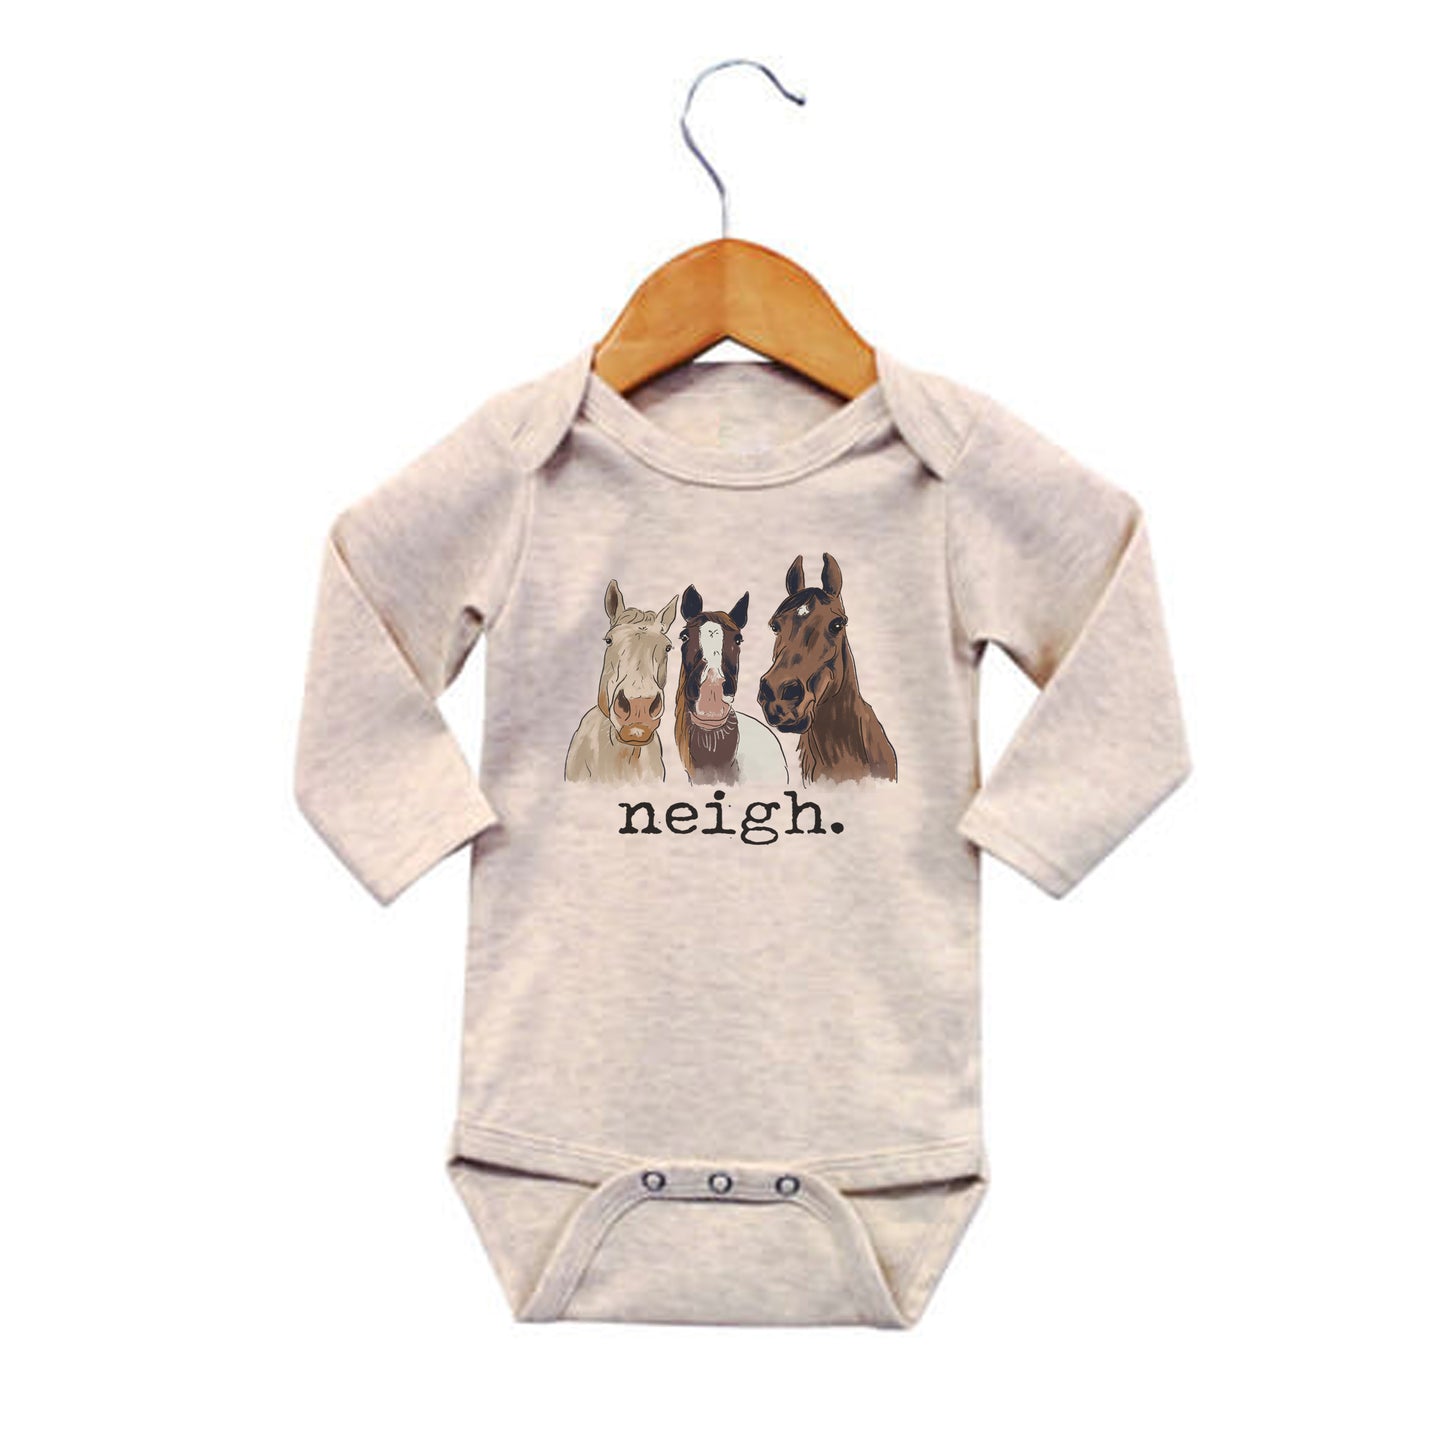 "Neigh" Three Horse Baby Body Suit